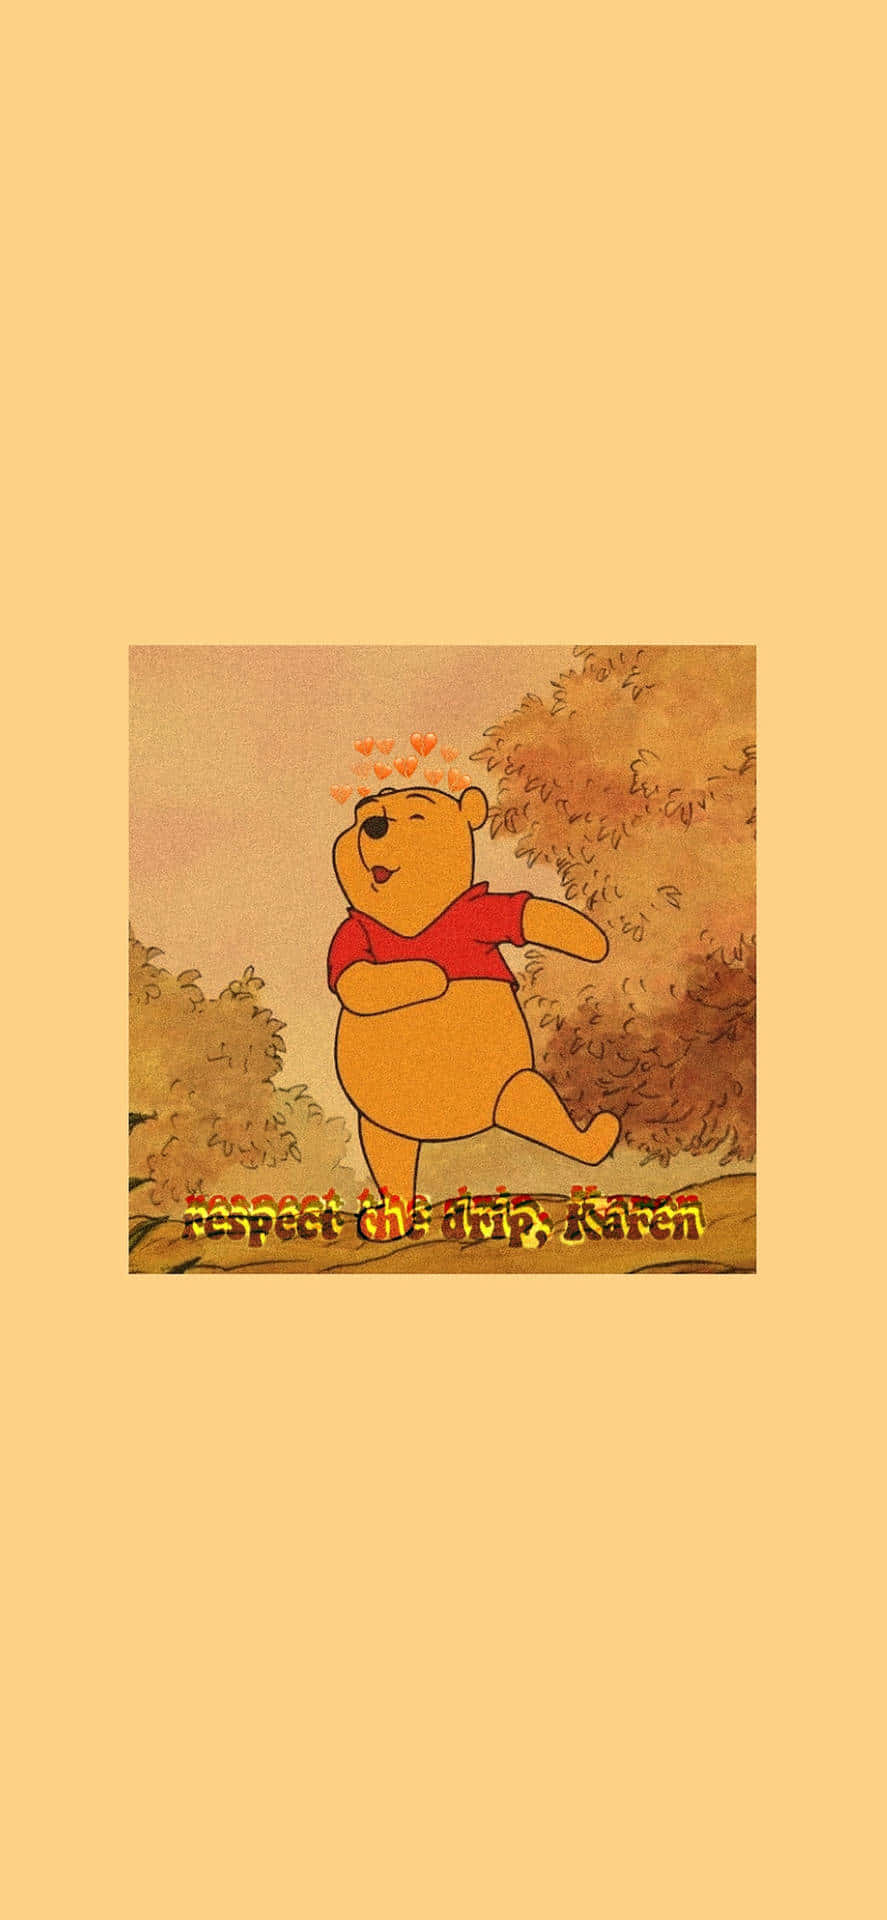 Disney's Love-ly Pooh Holiday by christen strang